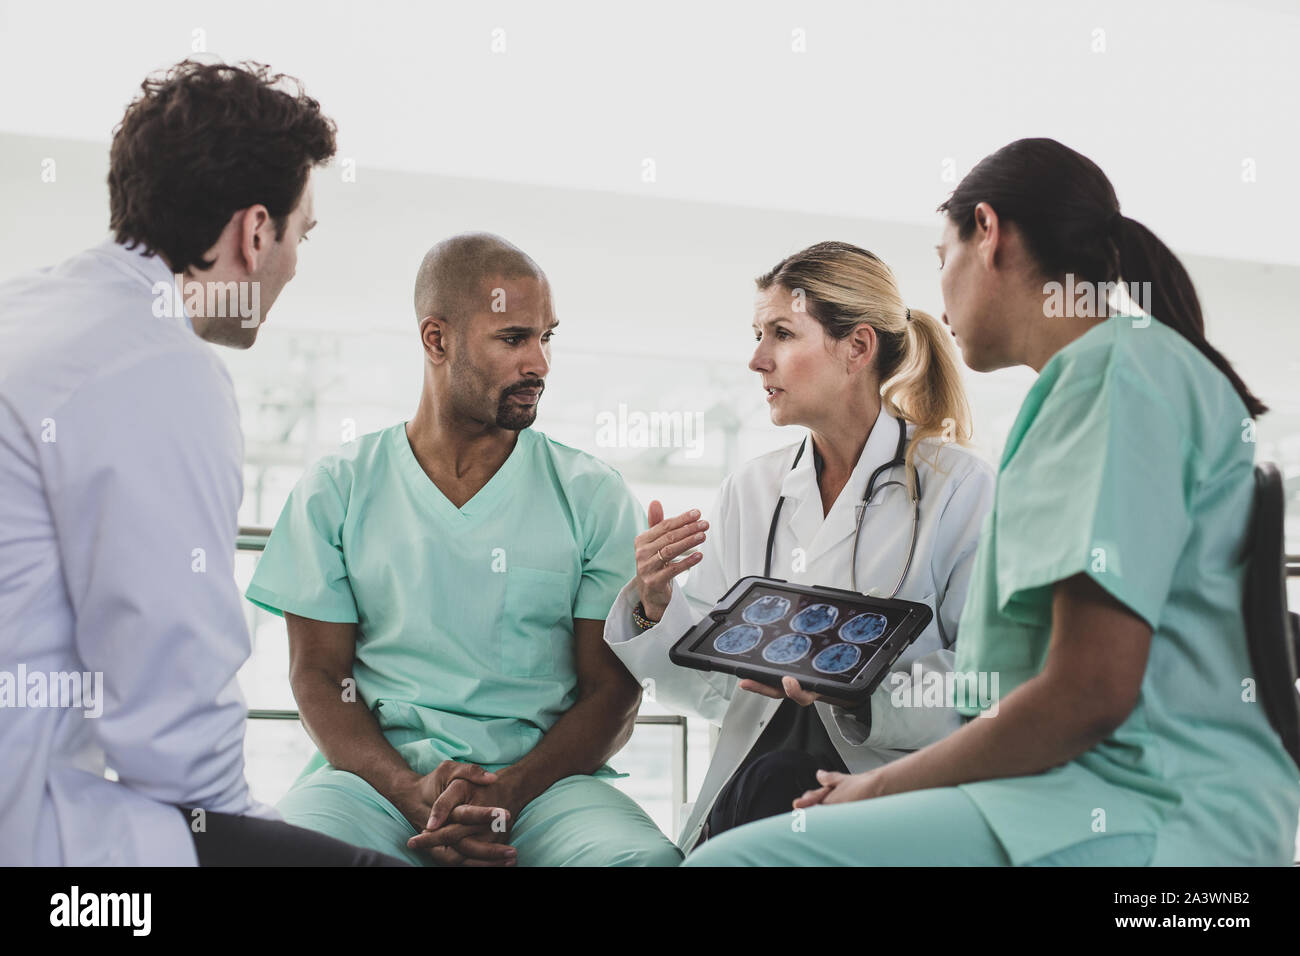 Medical professionals discussing patient treatment in a hospital Stock Photo